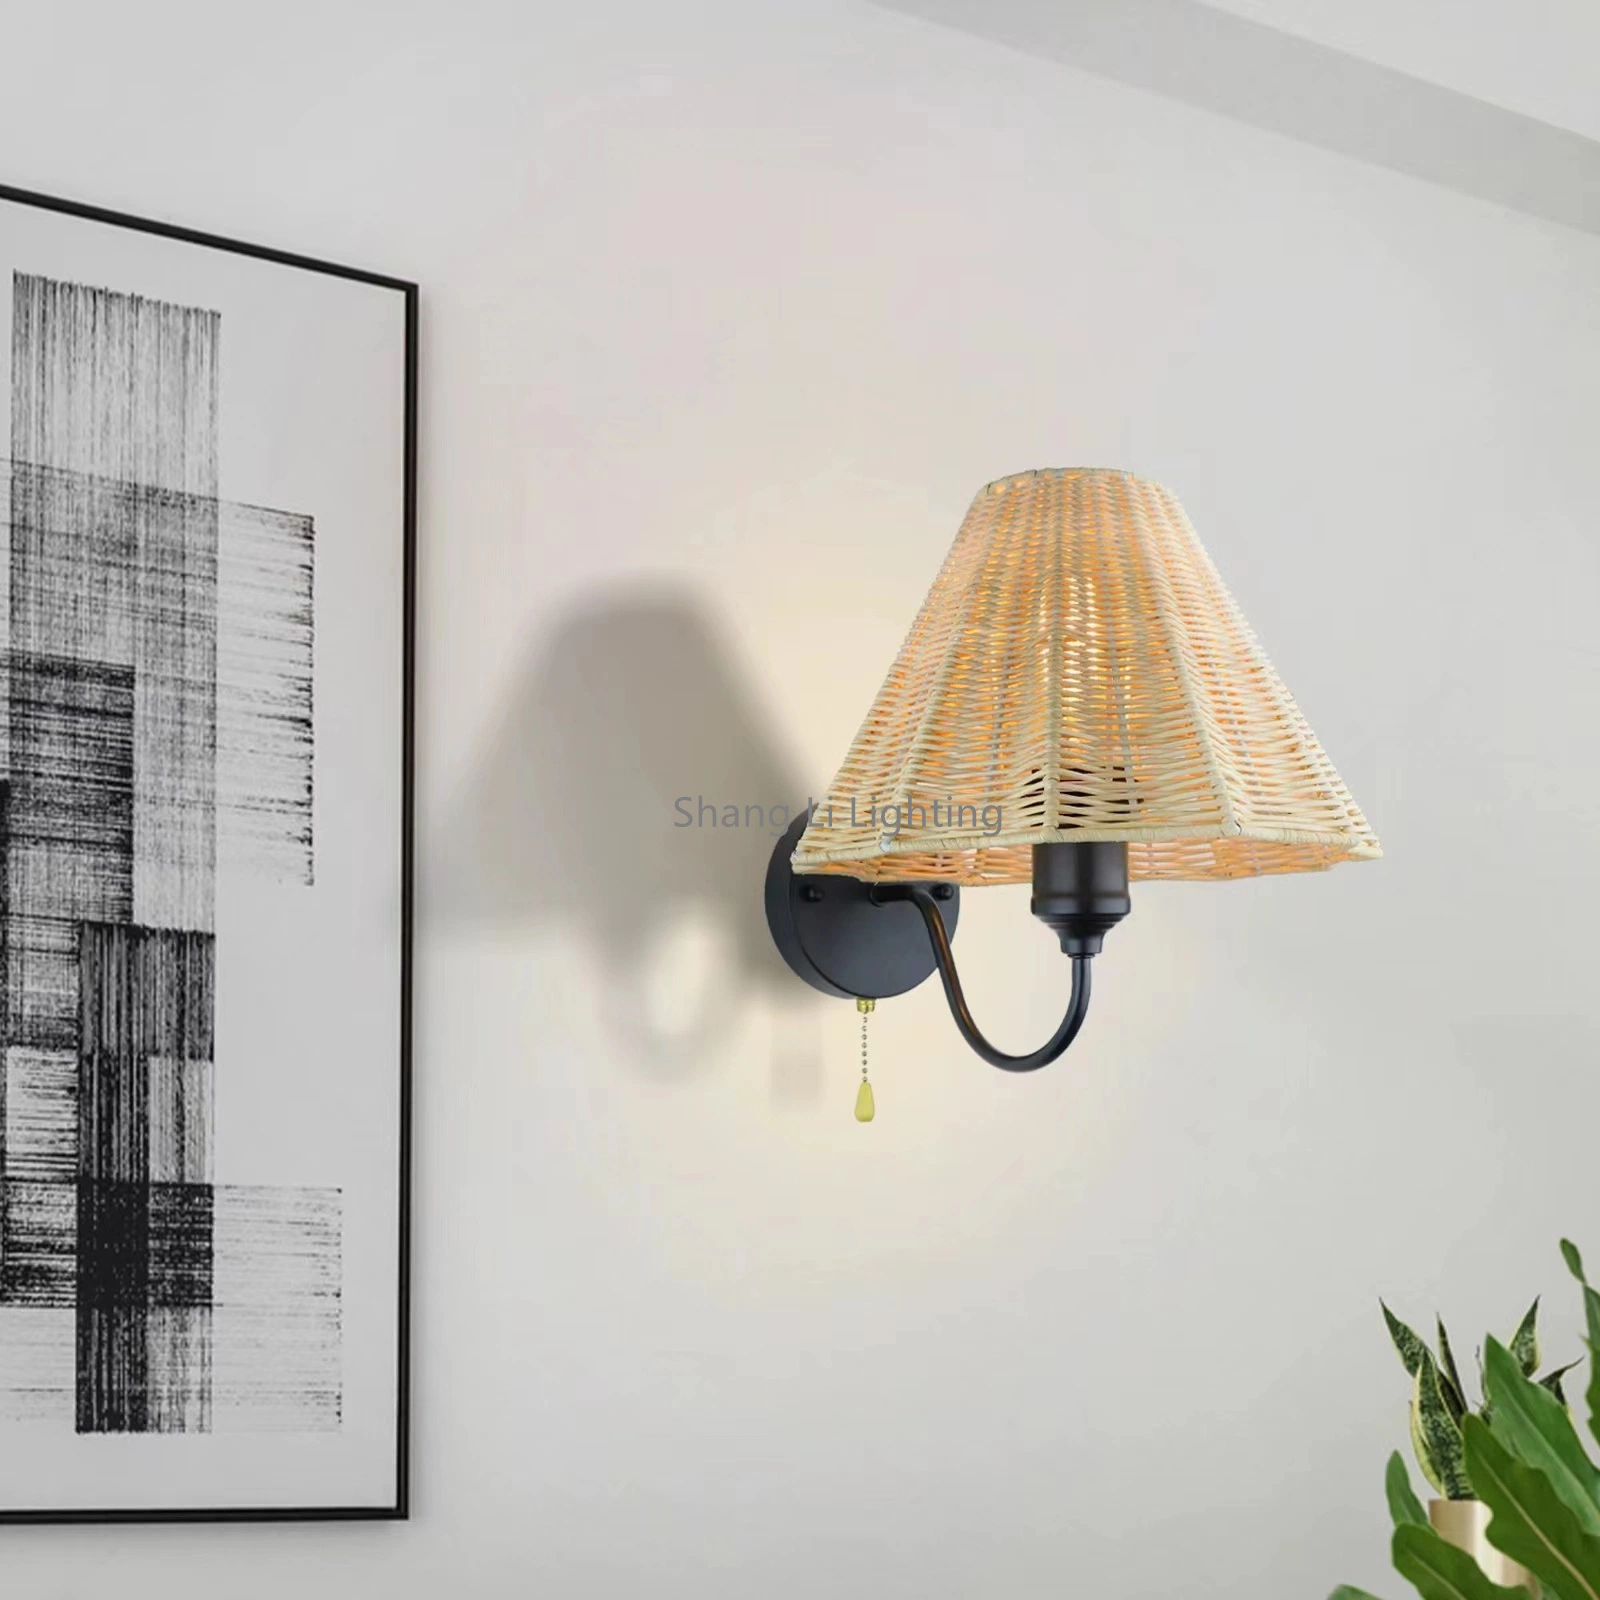 Modern Chinese Style Rocker Arm Wall Lamp Bedroom Bedside Lamp Japanese Style Living Room Study Creative Hand-Woven Decoration Wall Lamp